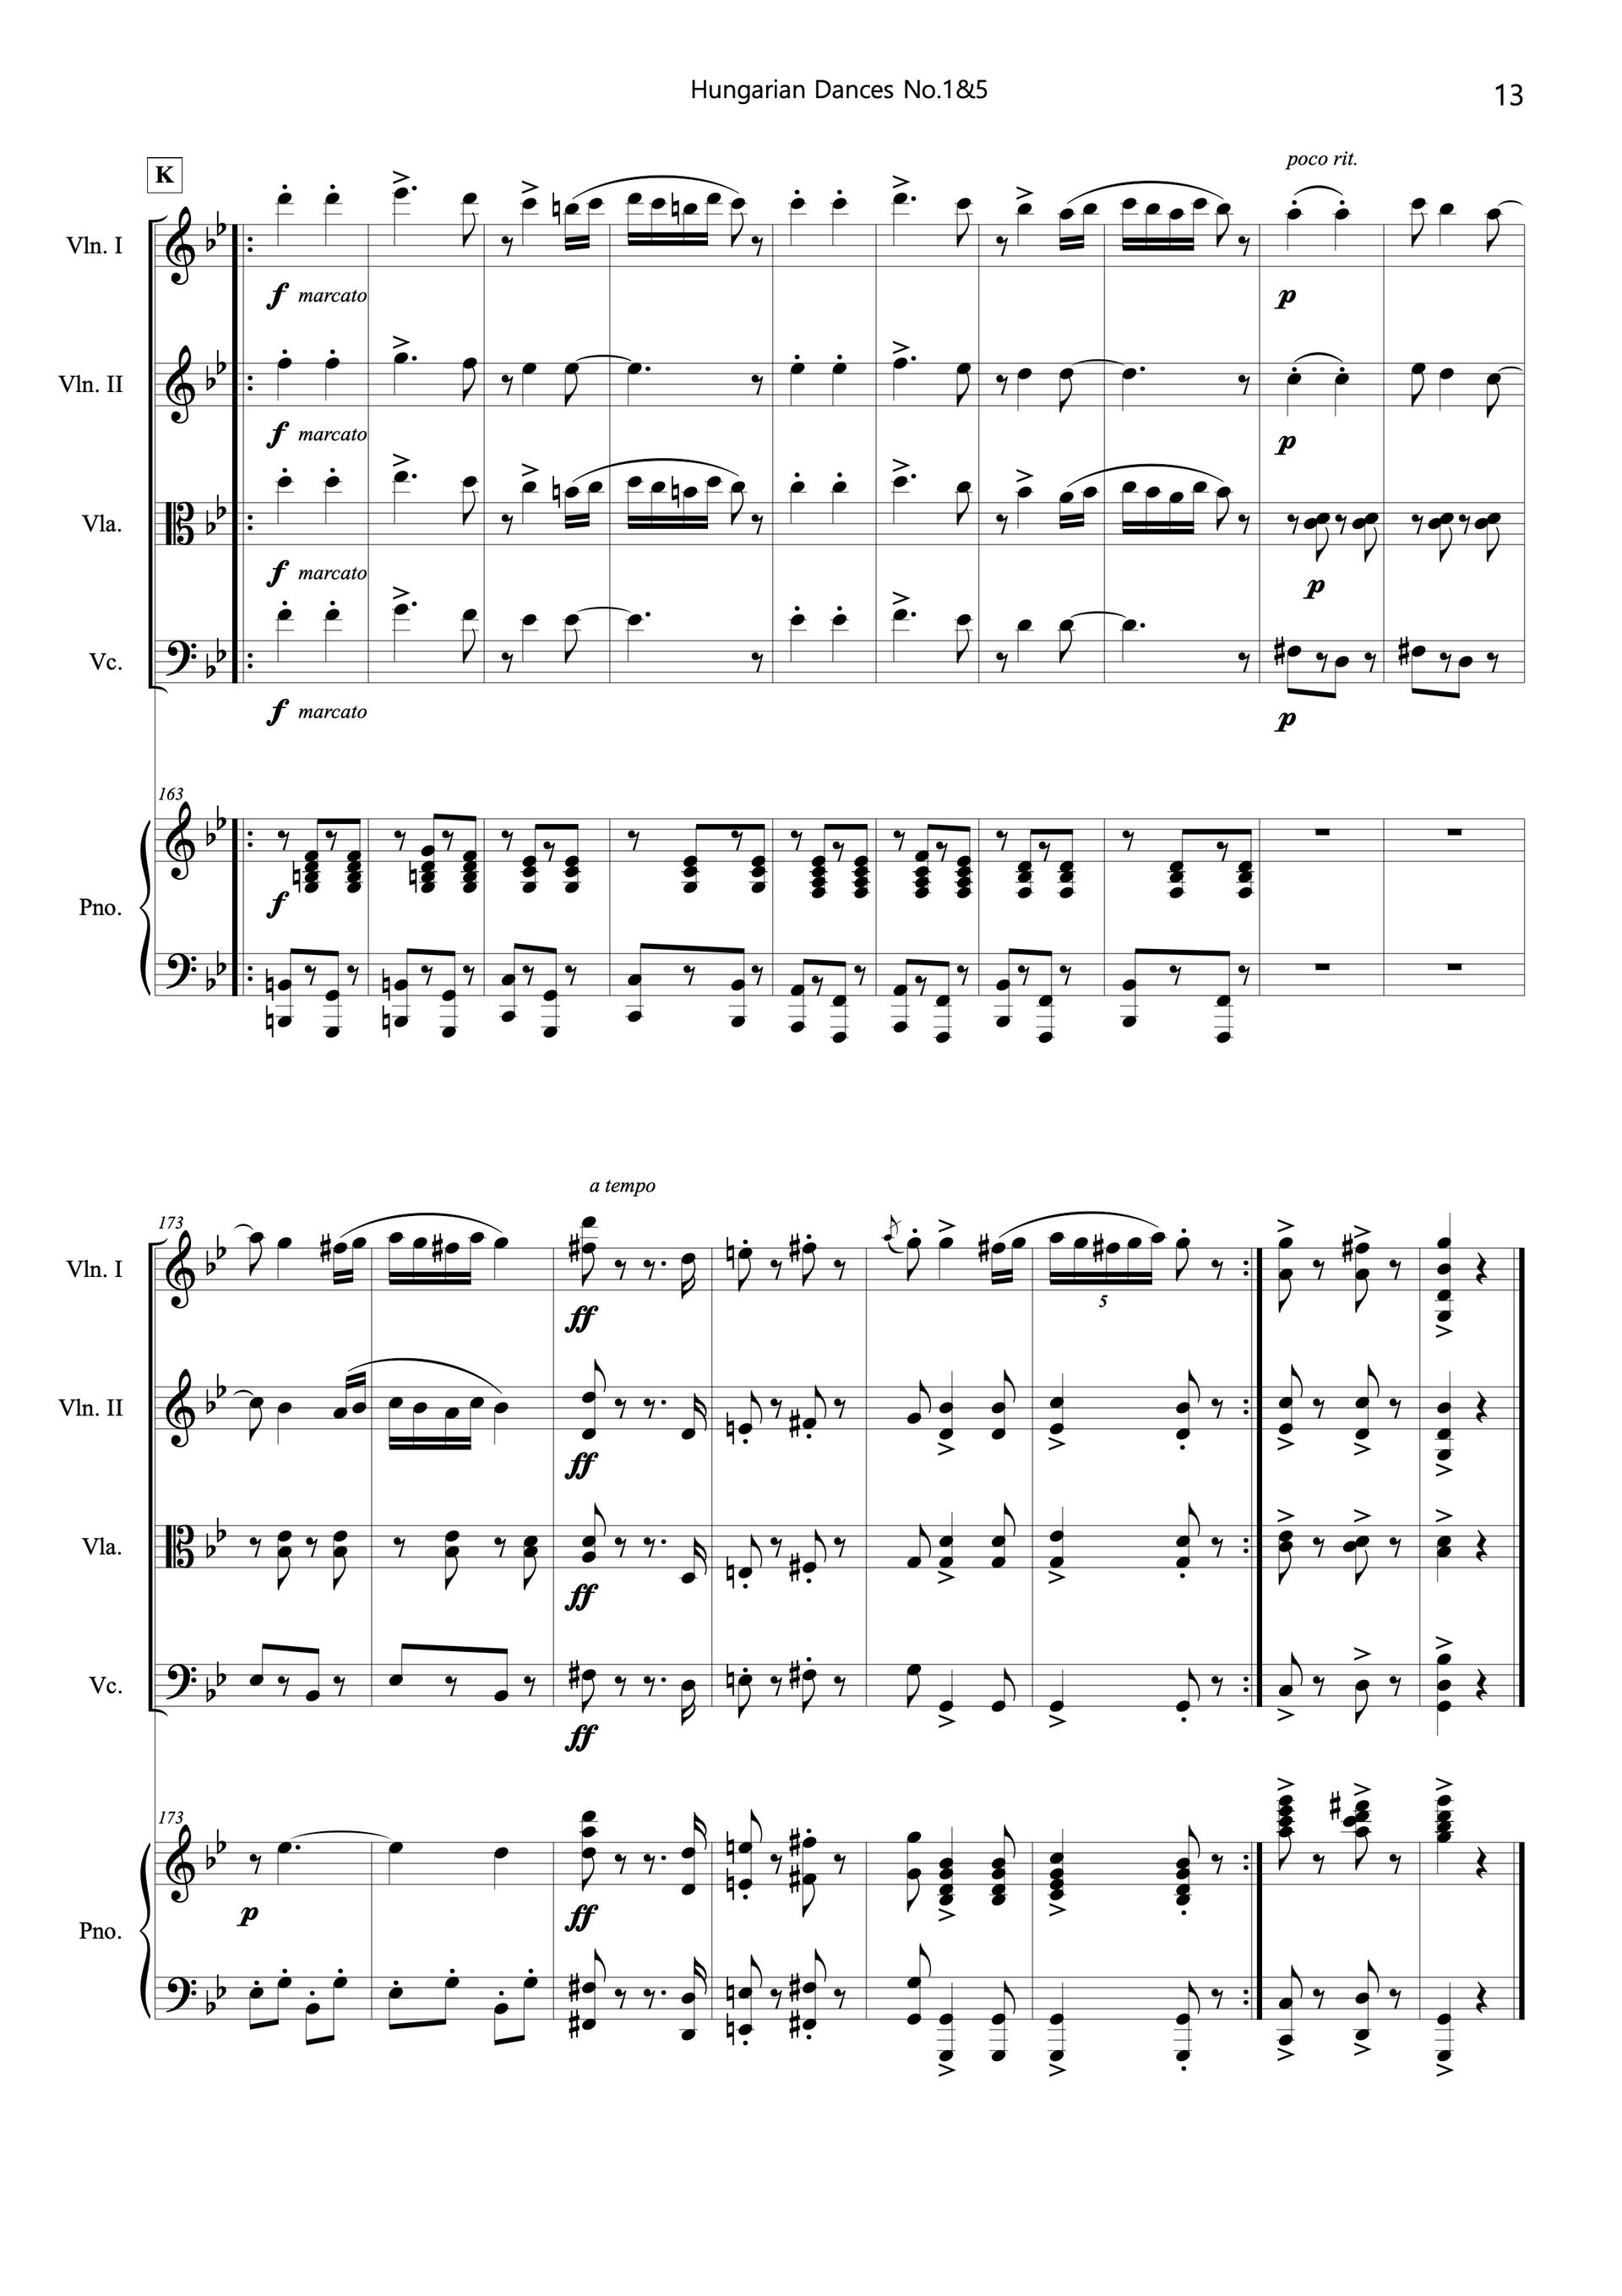 Sheet music of Hungarian Dances No. 1 and 5 arranged for violins, viola, cello and piano quintet preview page 13